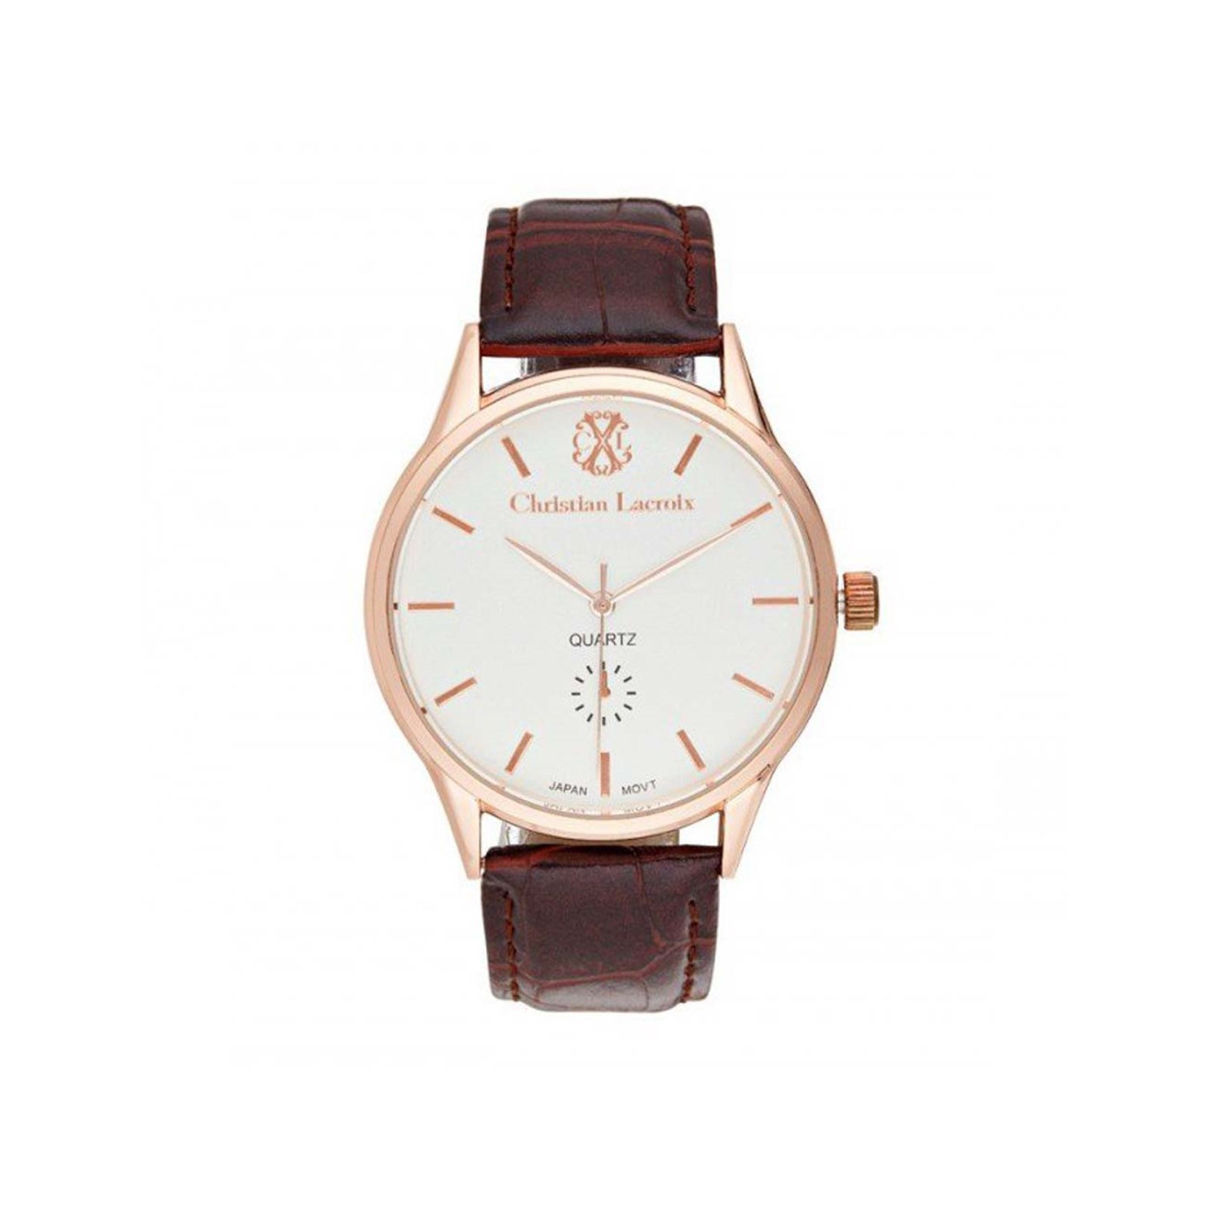 Maurice Lacroix Watches for Men - Shop Now on FARFETCH